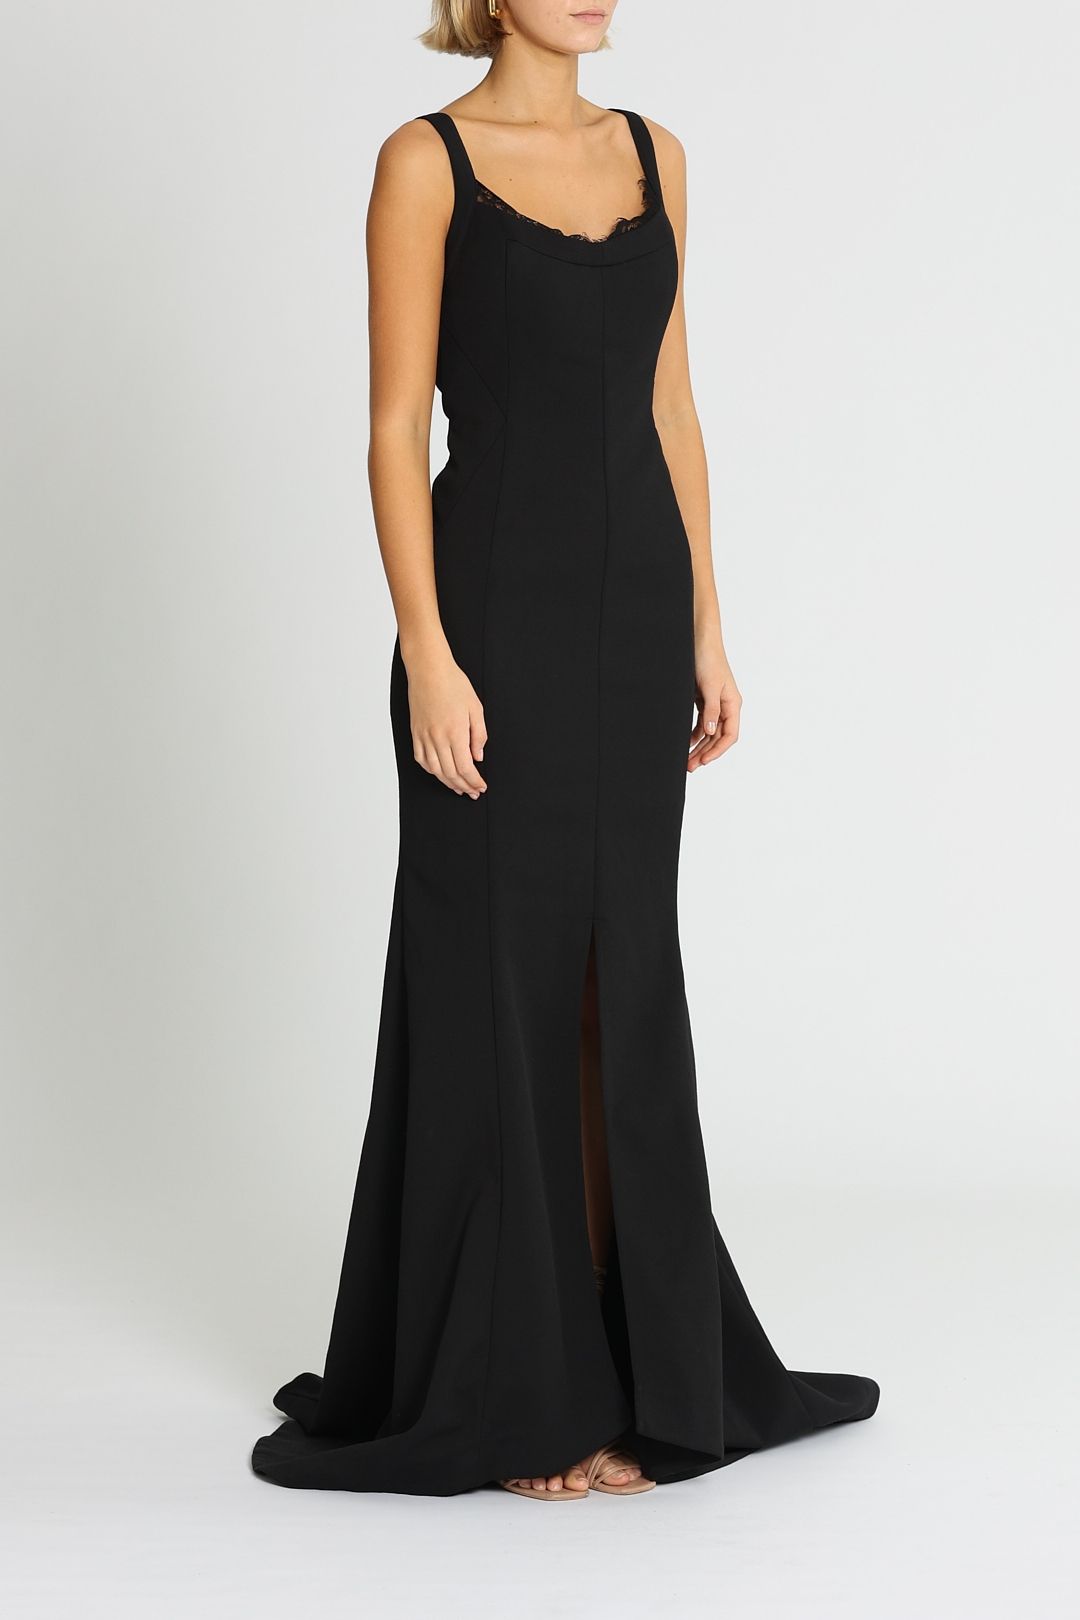 Grace and Hart Calliope Gown Black Floor Length